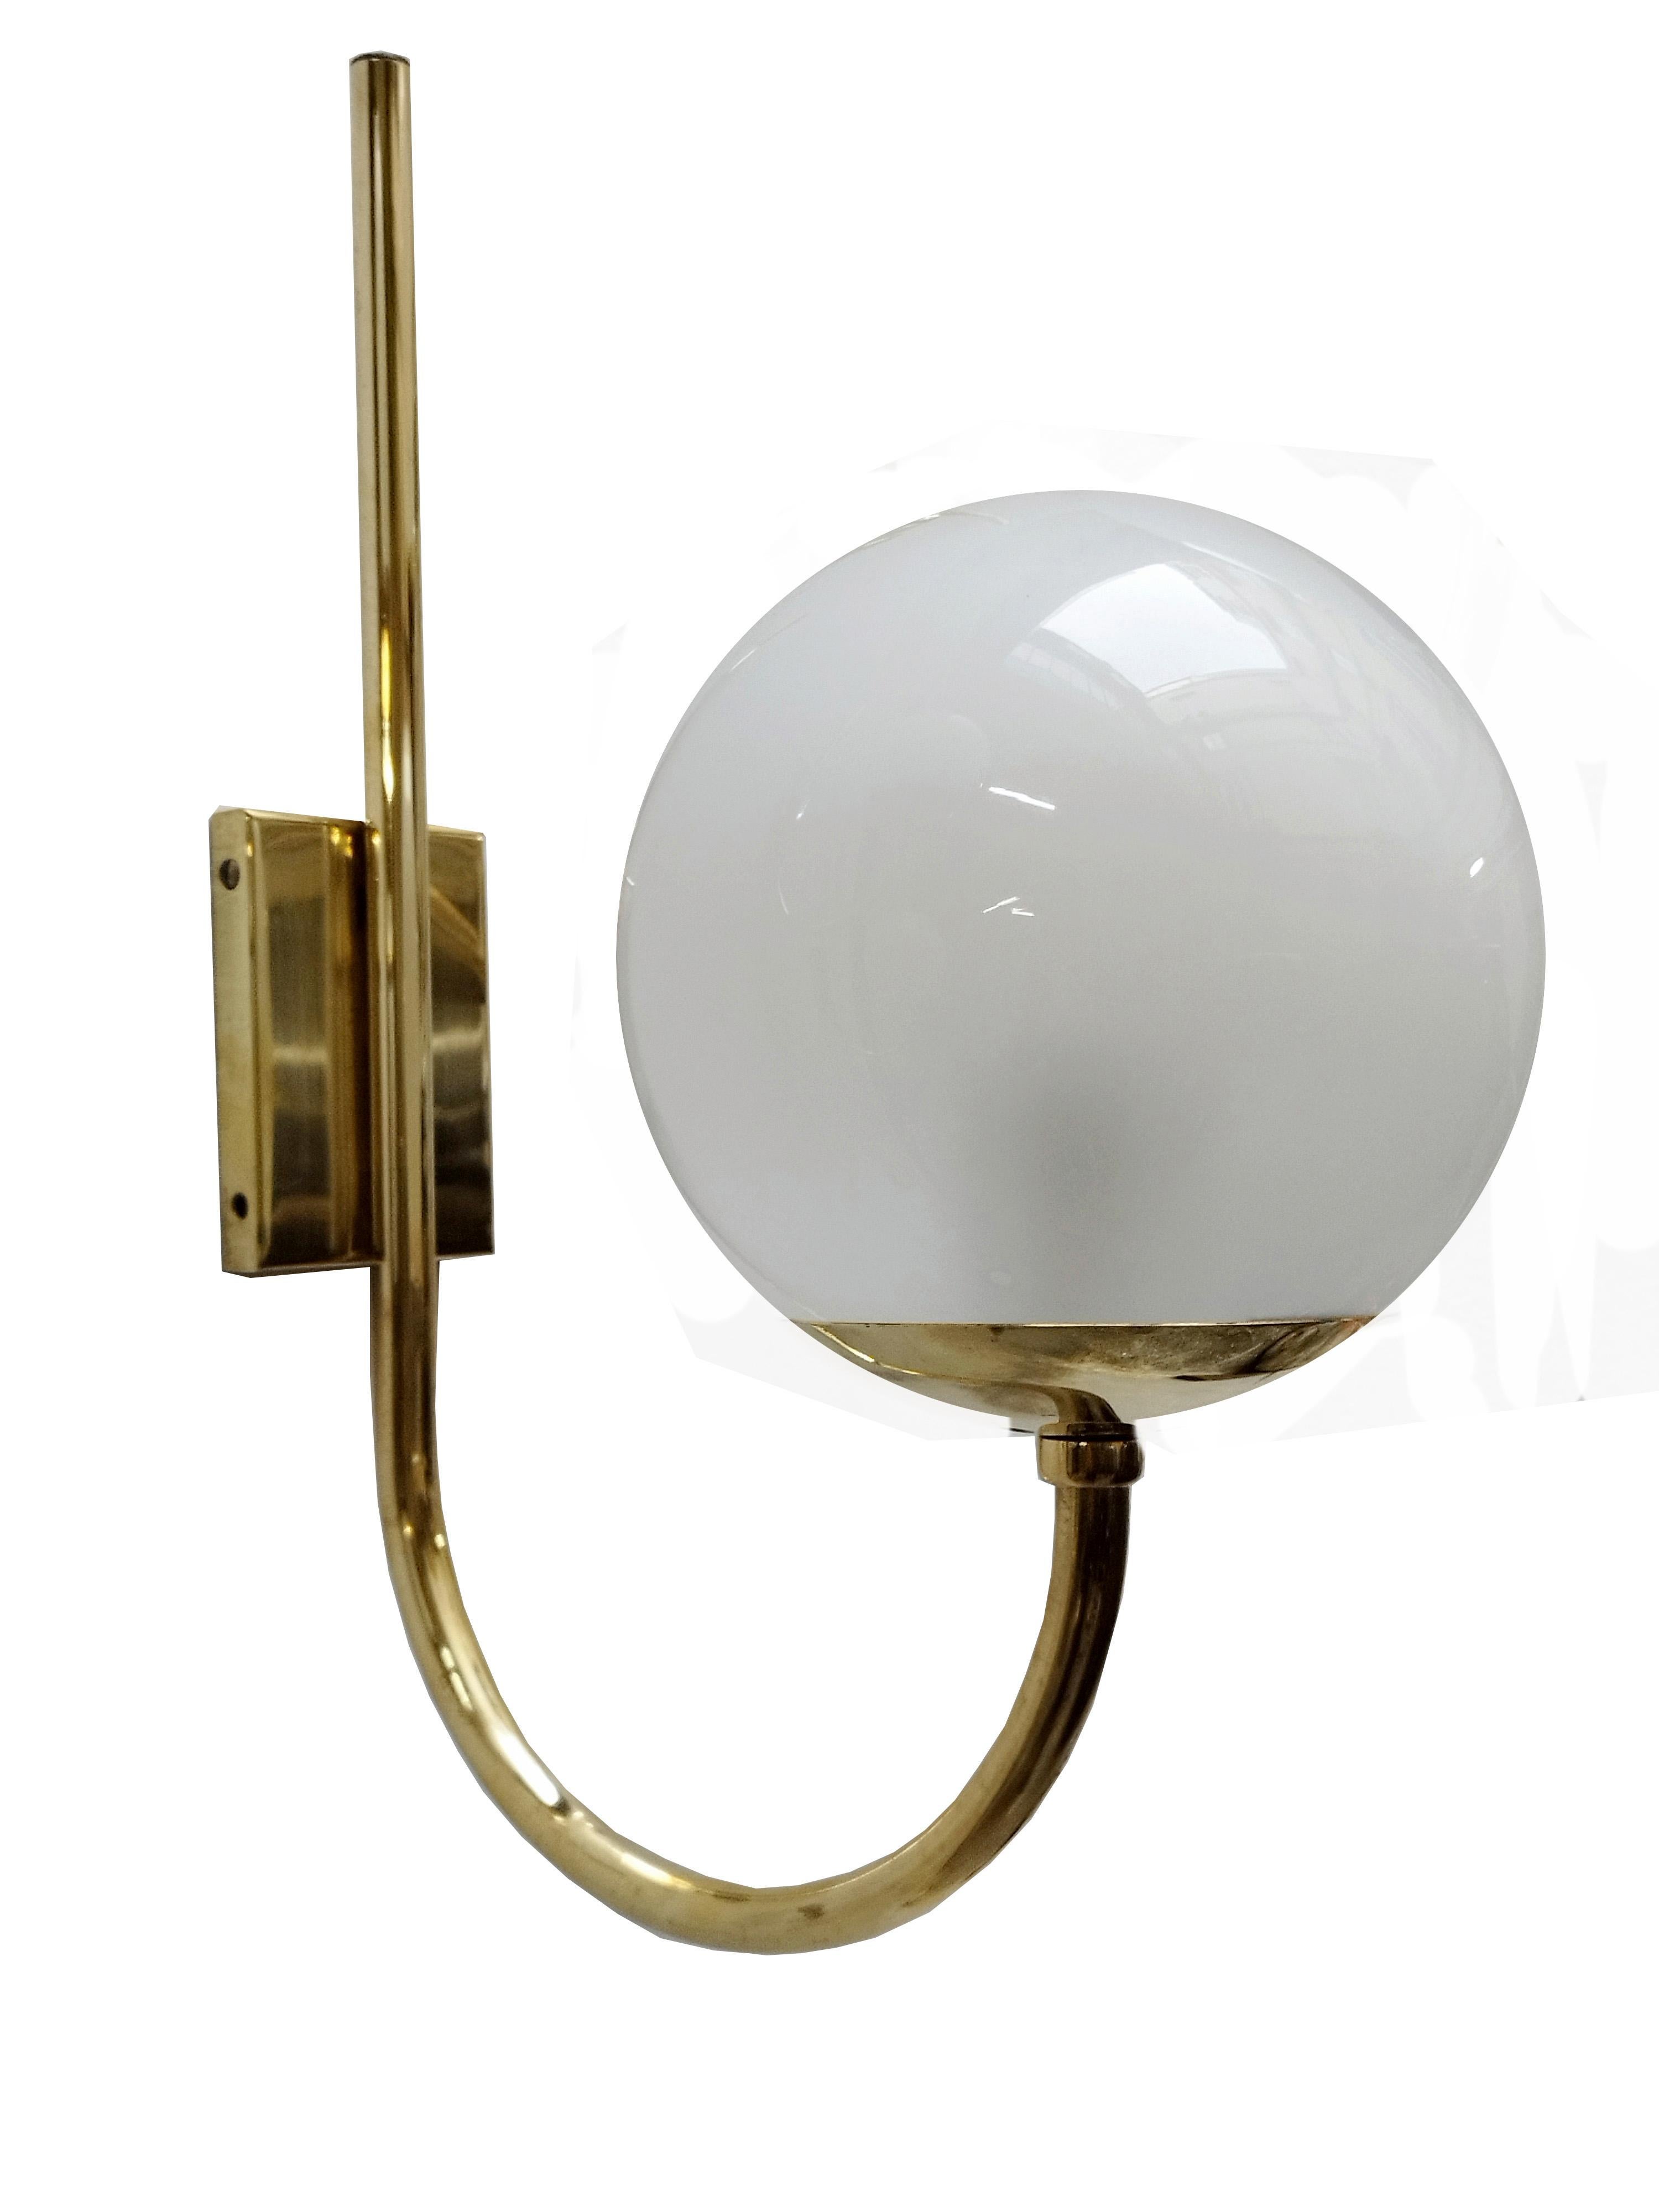 Beautiful wall lamp, design attrib. Luigi Caccia Dominioni for the Italian manufacturer Azucena.
The wall lamp has a beautiful, shining golden brass stem, which is fixed to the wall by means of a rectangular plate and which supports a white glass